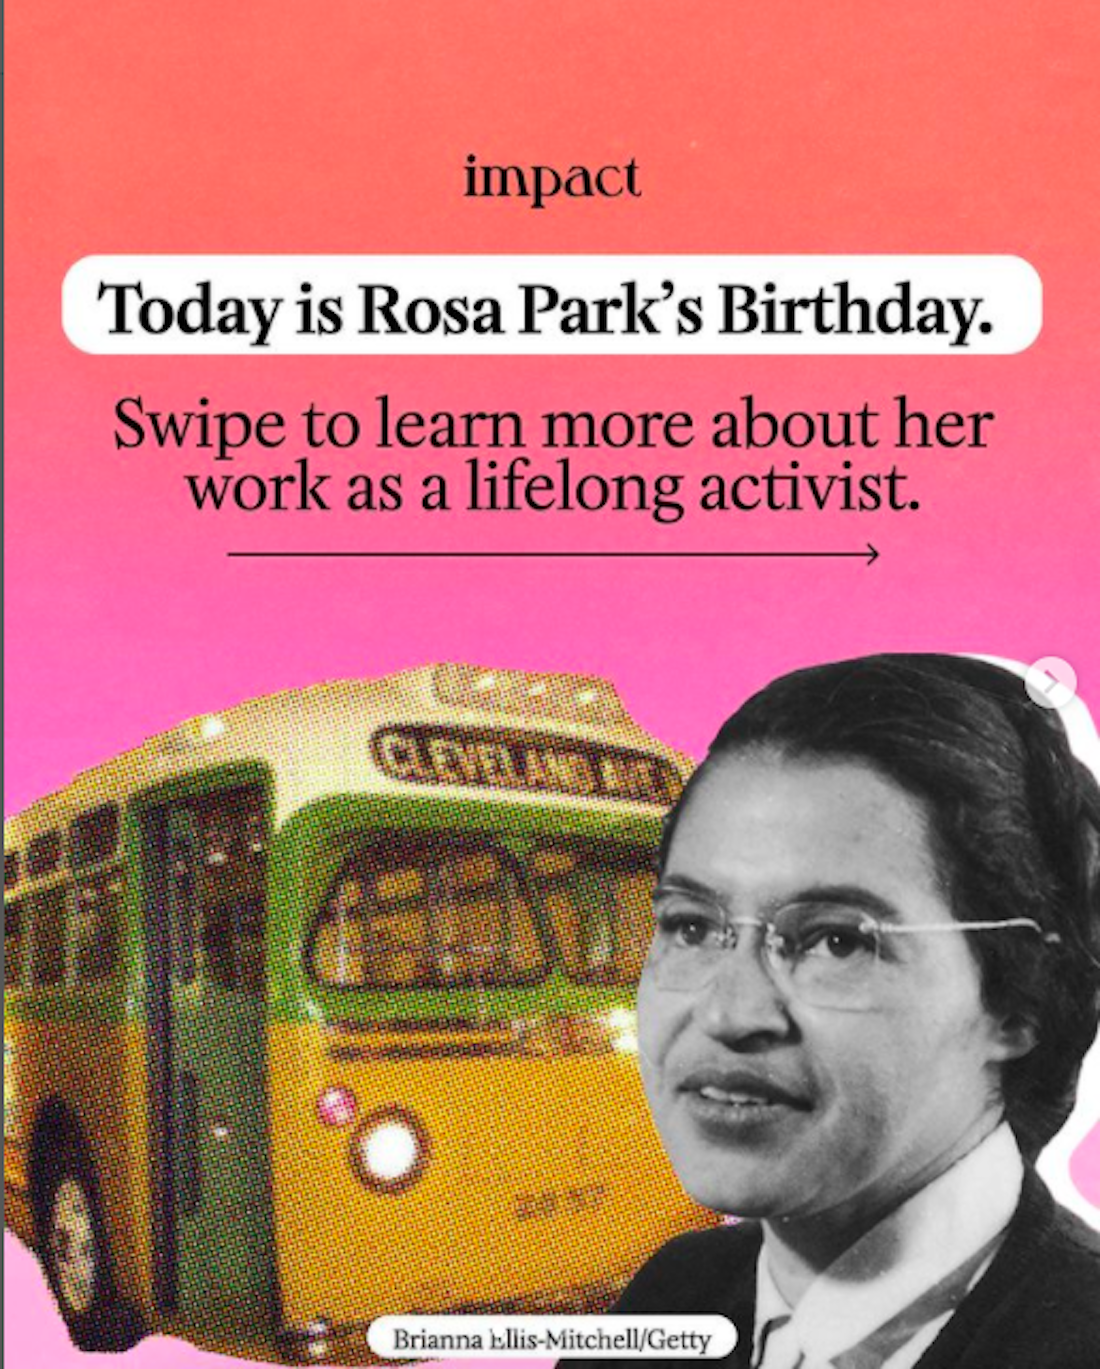 A screenshot from Instagram user Impact's page where they posted about Rosa Park for her birthday. 